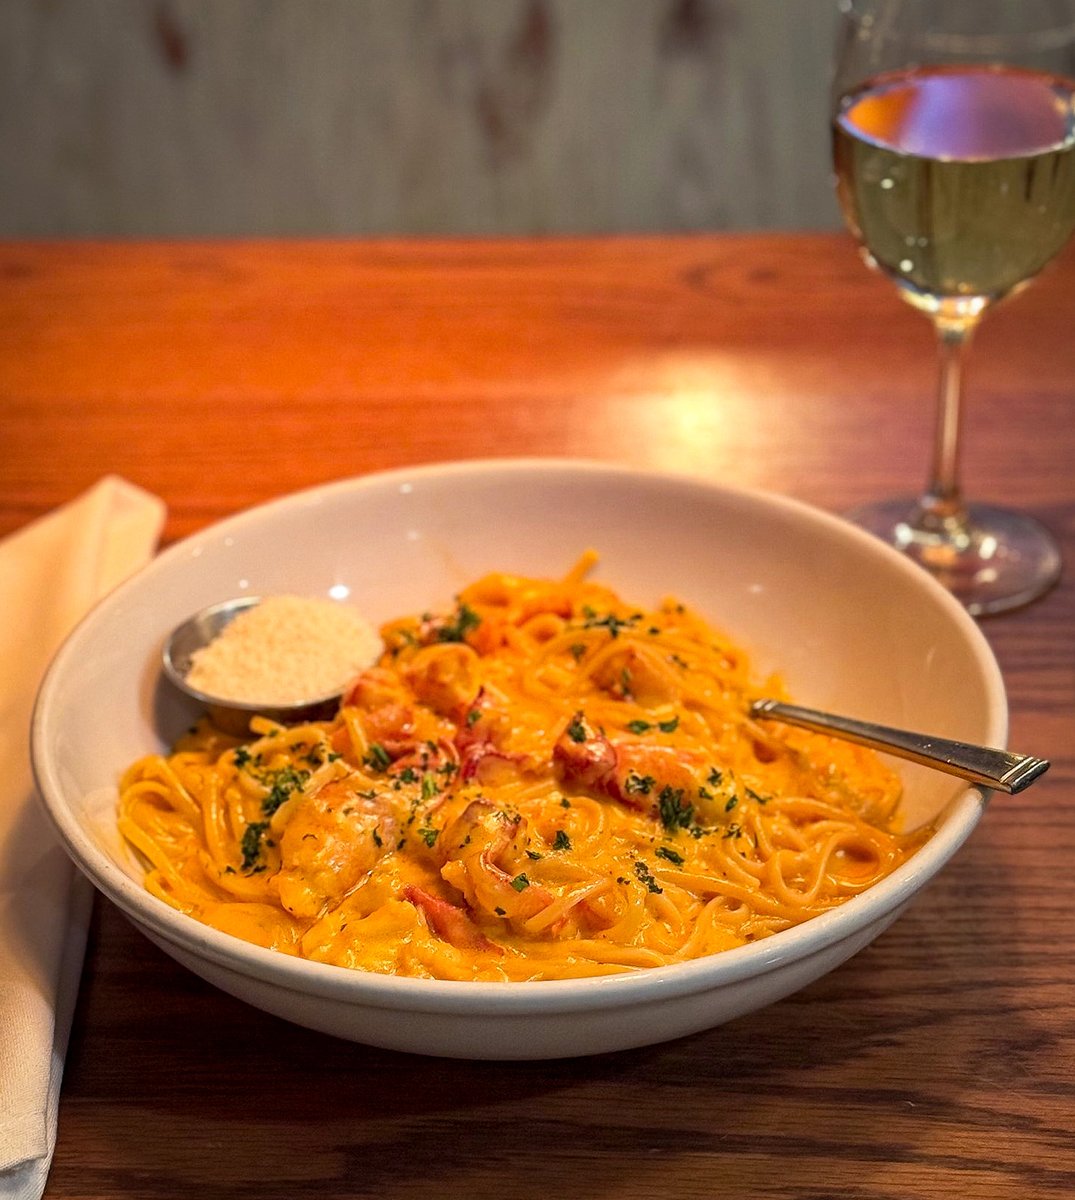 In need of some date night inspo? Try a stroll down by the water front followed up a decadent bowl of our famous Lobster Linguini!🍝 #datenight #delivery #supportlocalbusiness #visitalx #seafood #patiodining #fishmarket #ubereats #nomnom #grubhub